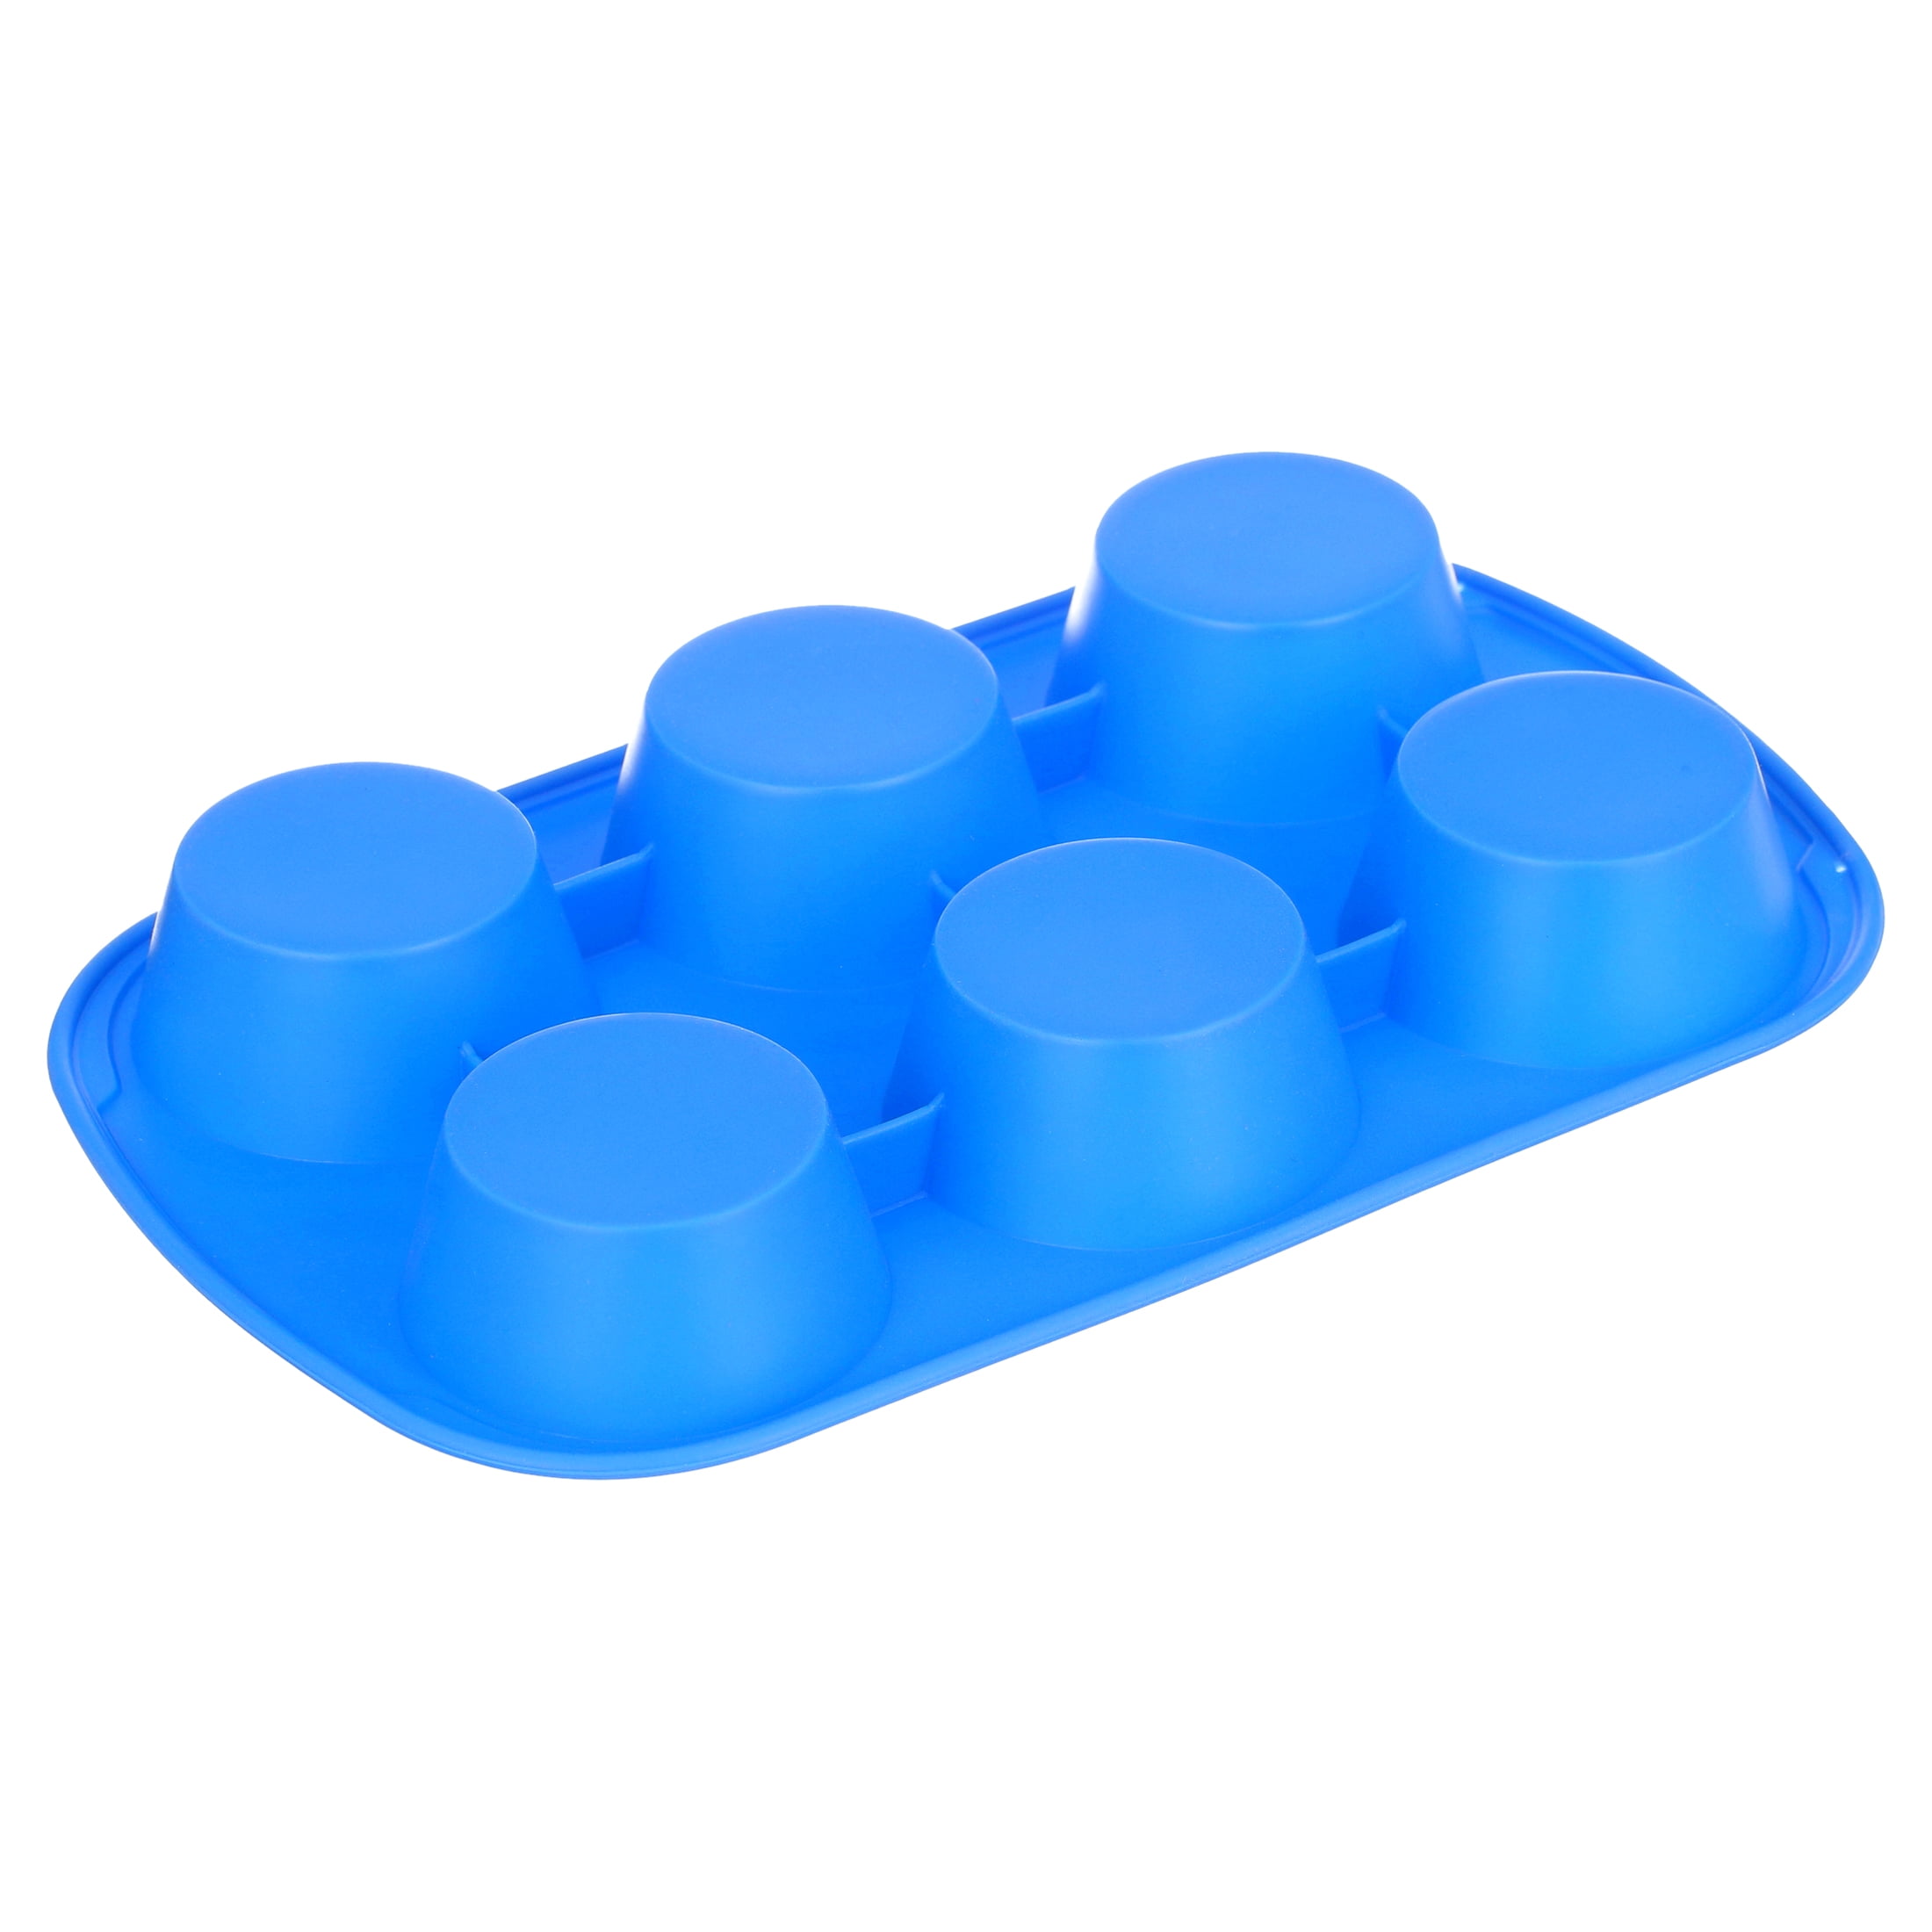 2105-4802 - Wilton Silicone Bakeware, 6 Cup Muffin Pan